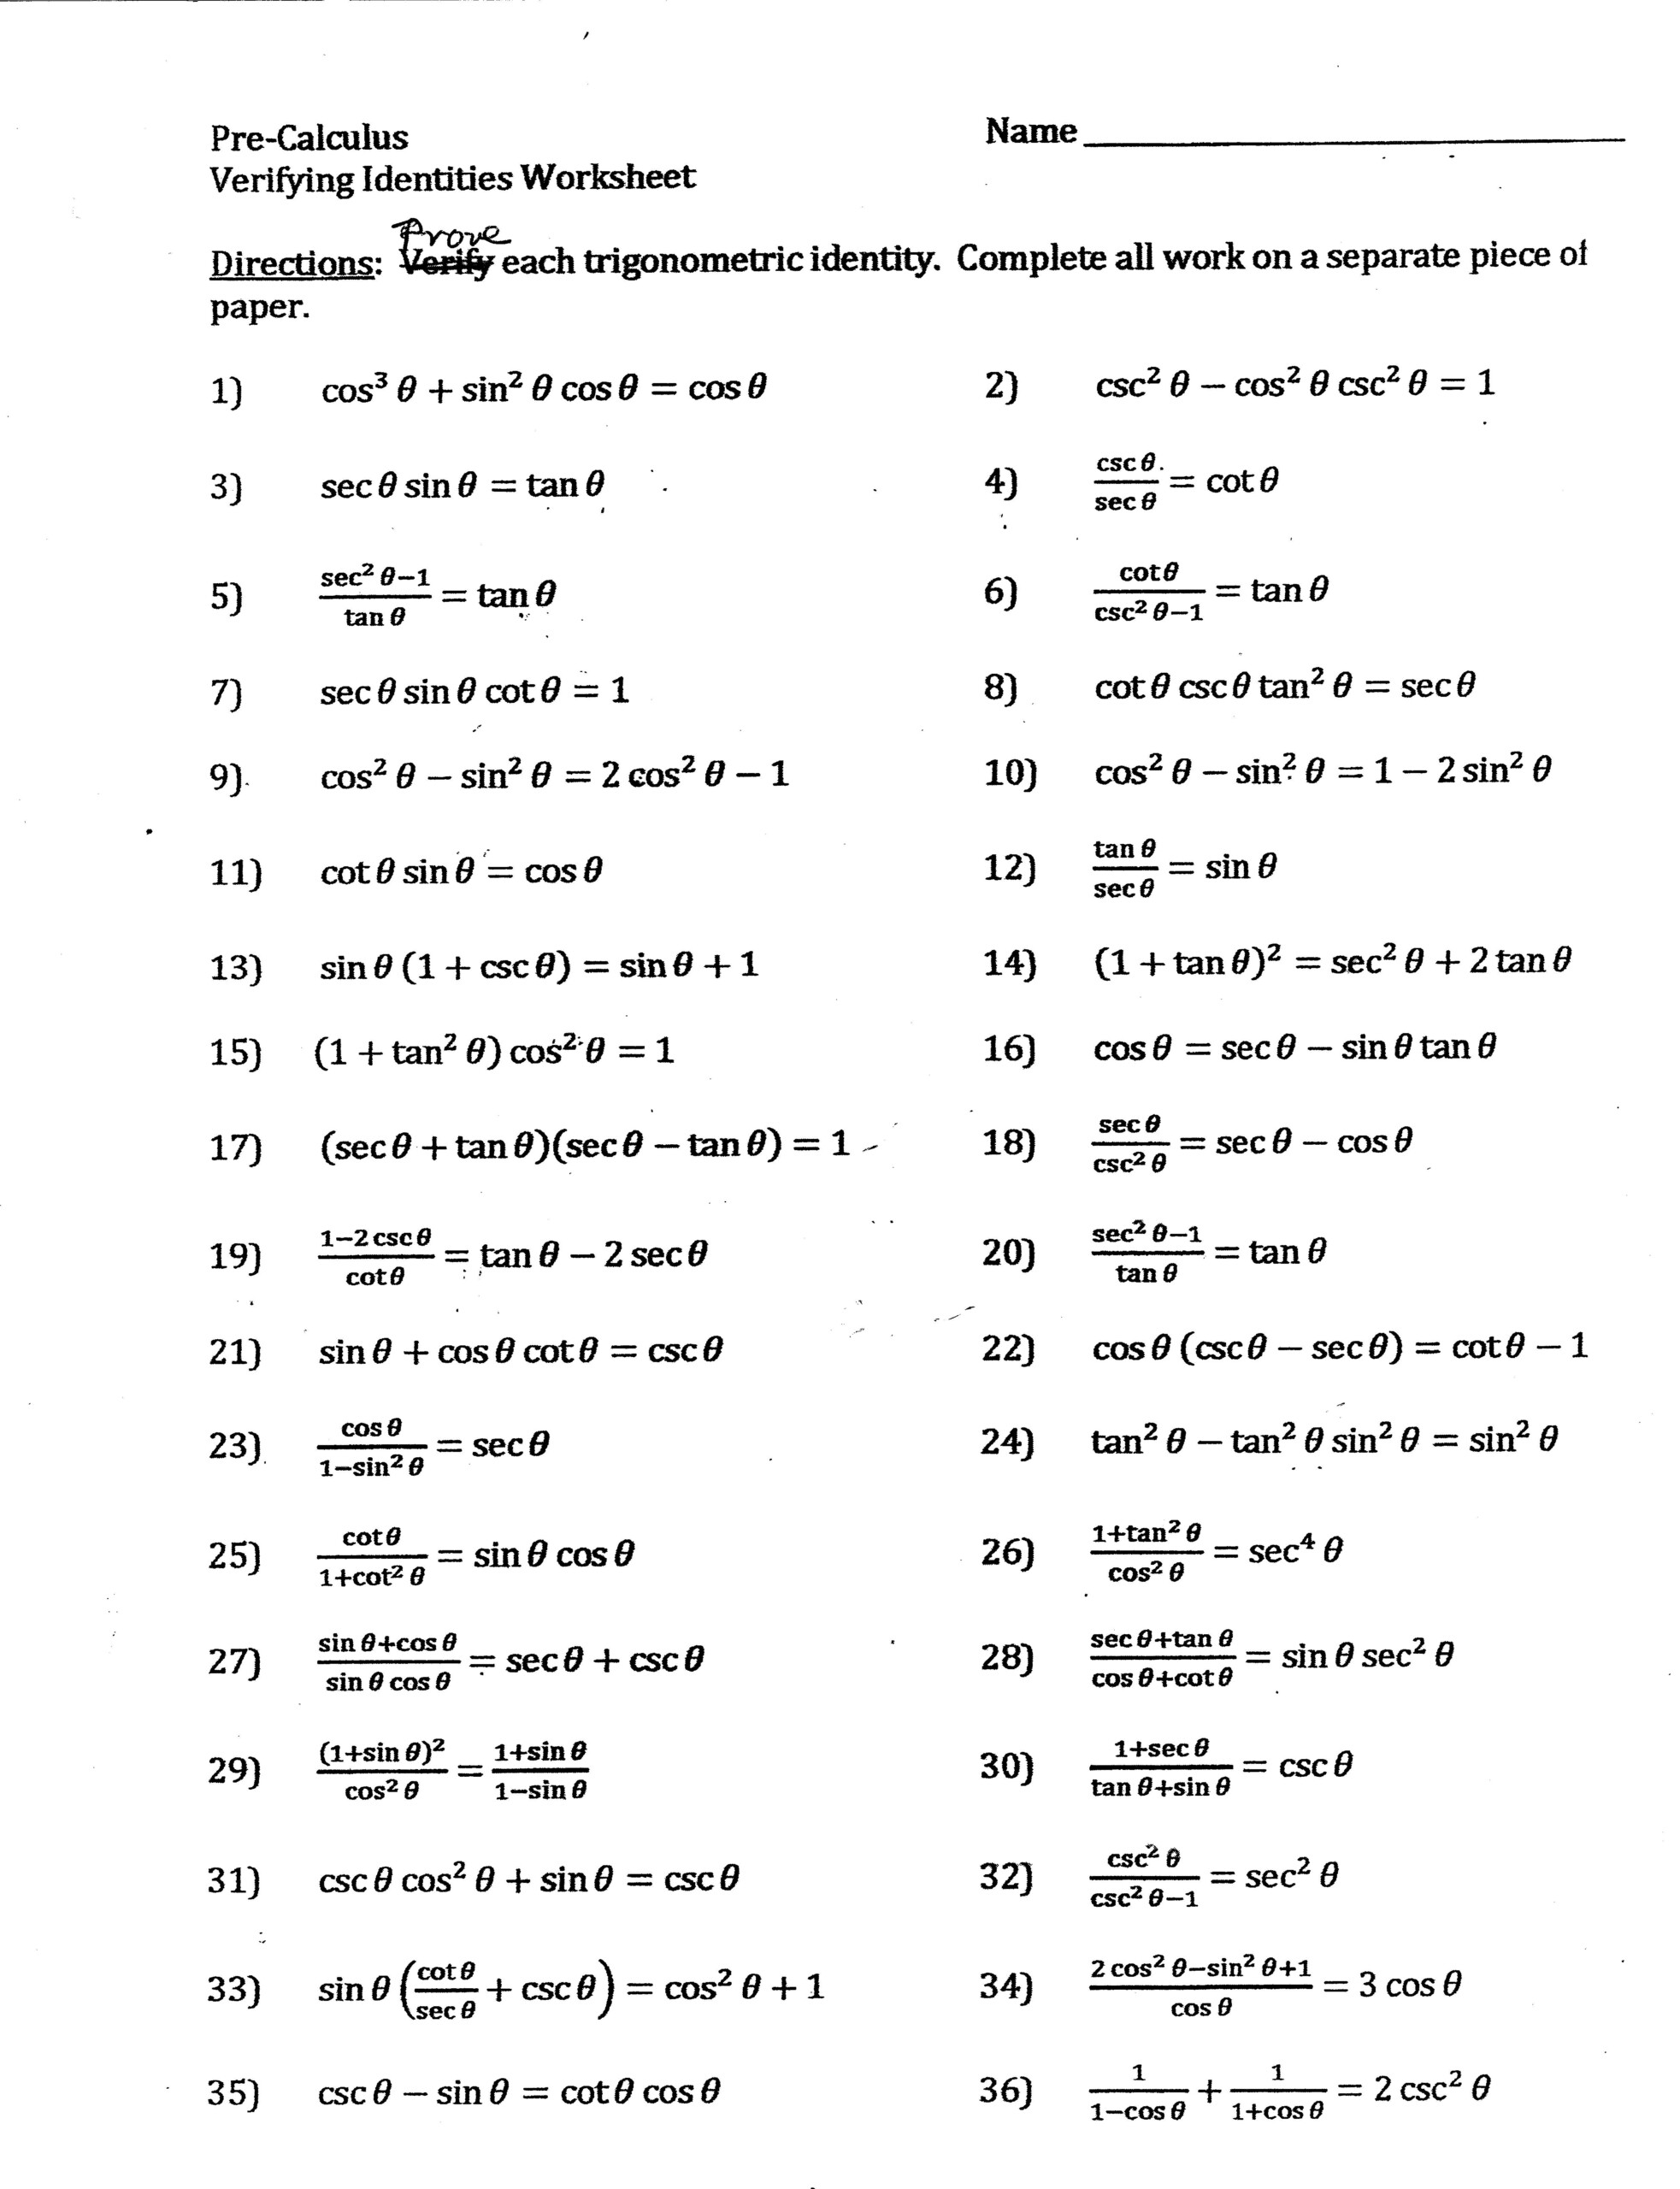 precalculus-composition-of-functions-worksheet-answers-pdf-function